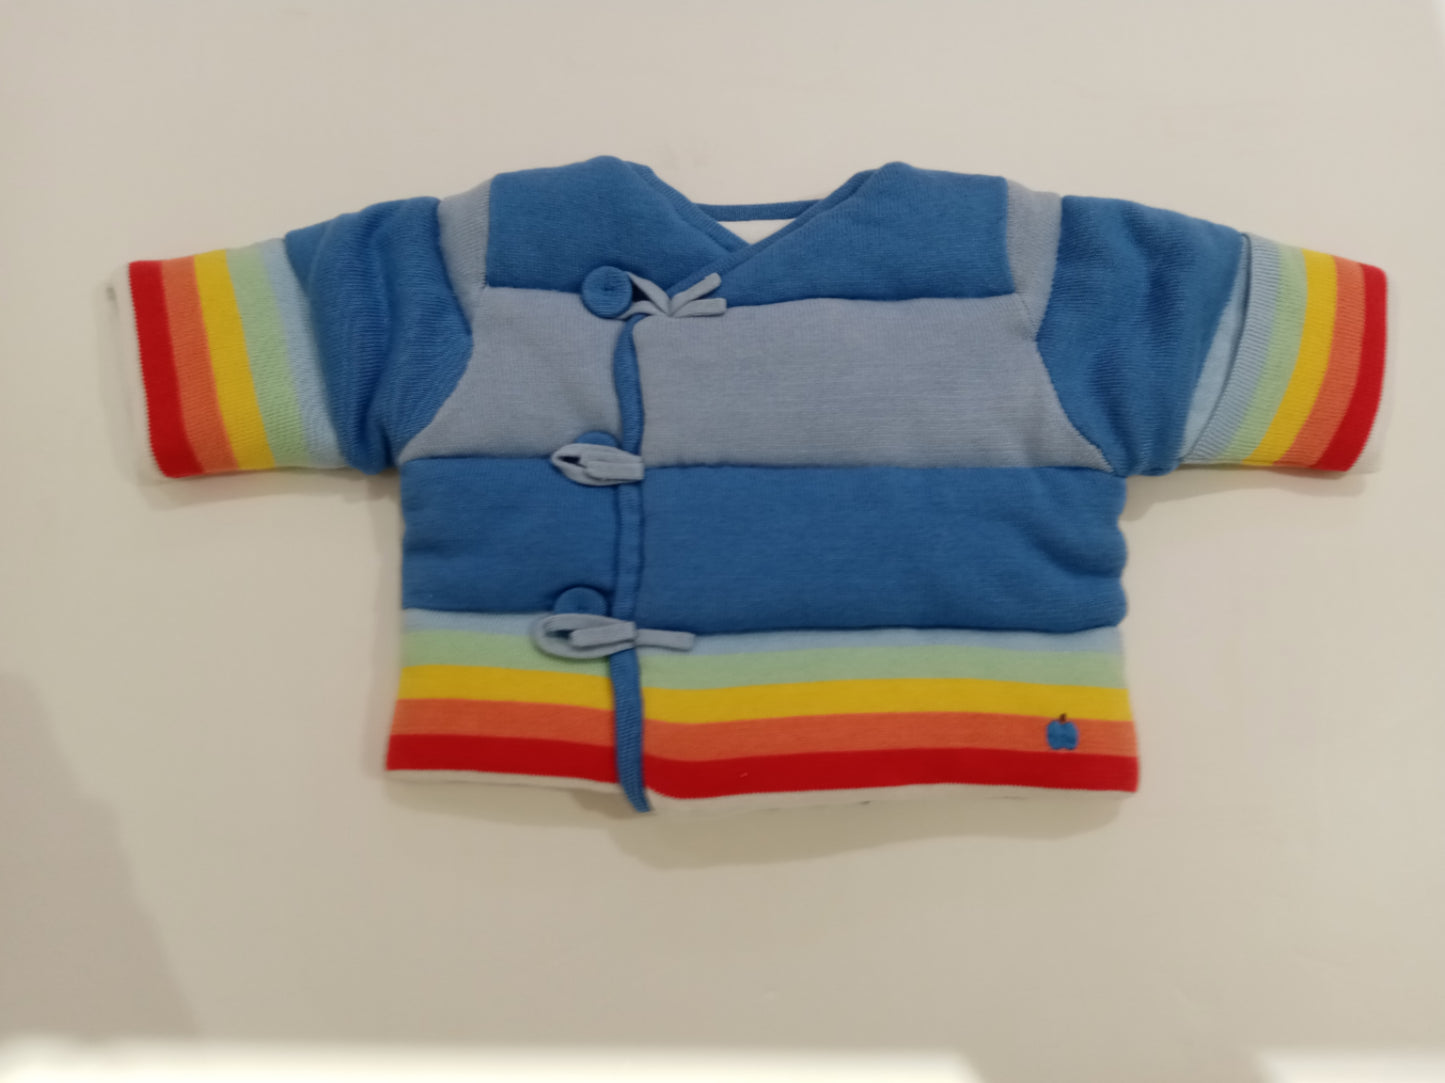 JACKET - BABY -  3 COLOR (PINK/GREY/BLUE) - BBA15 003